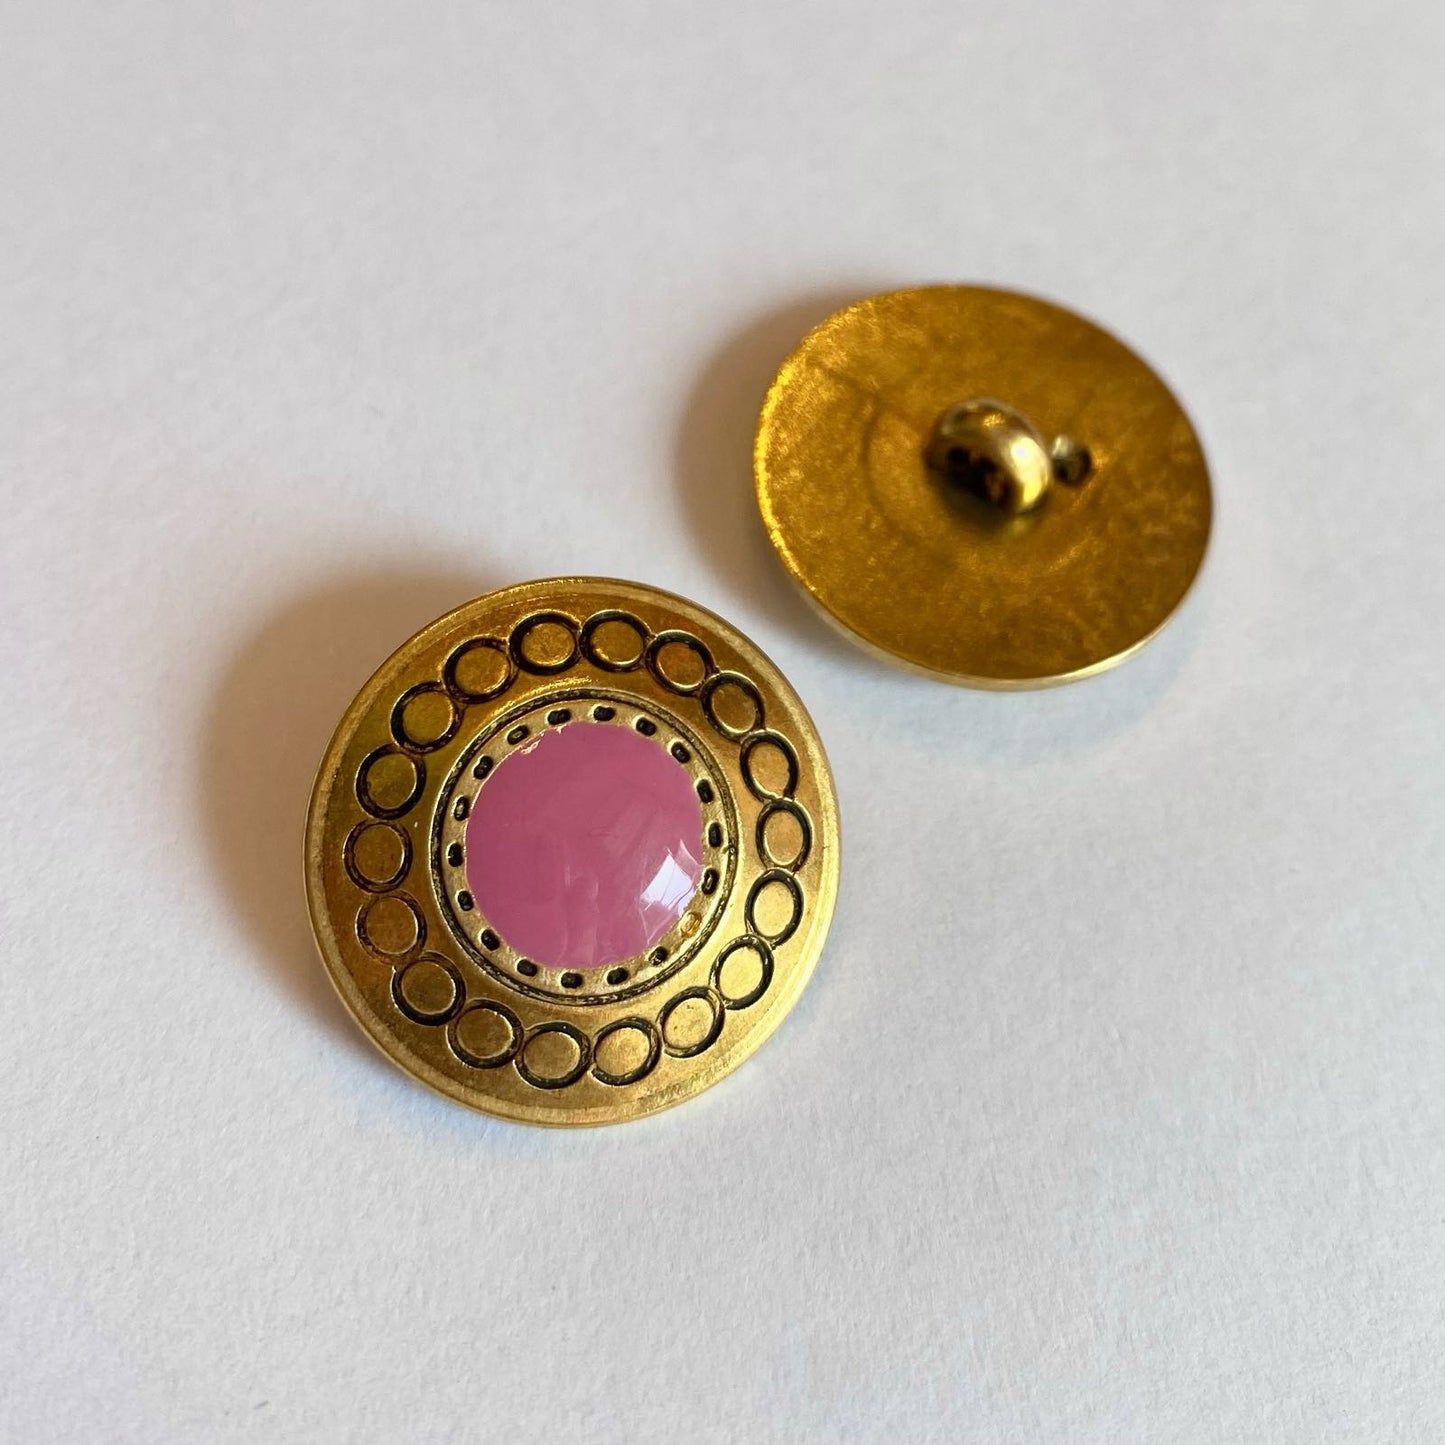 Gold button with pink center 20 mm